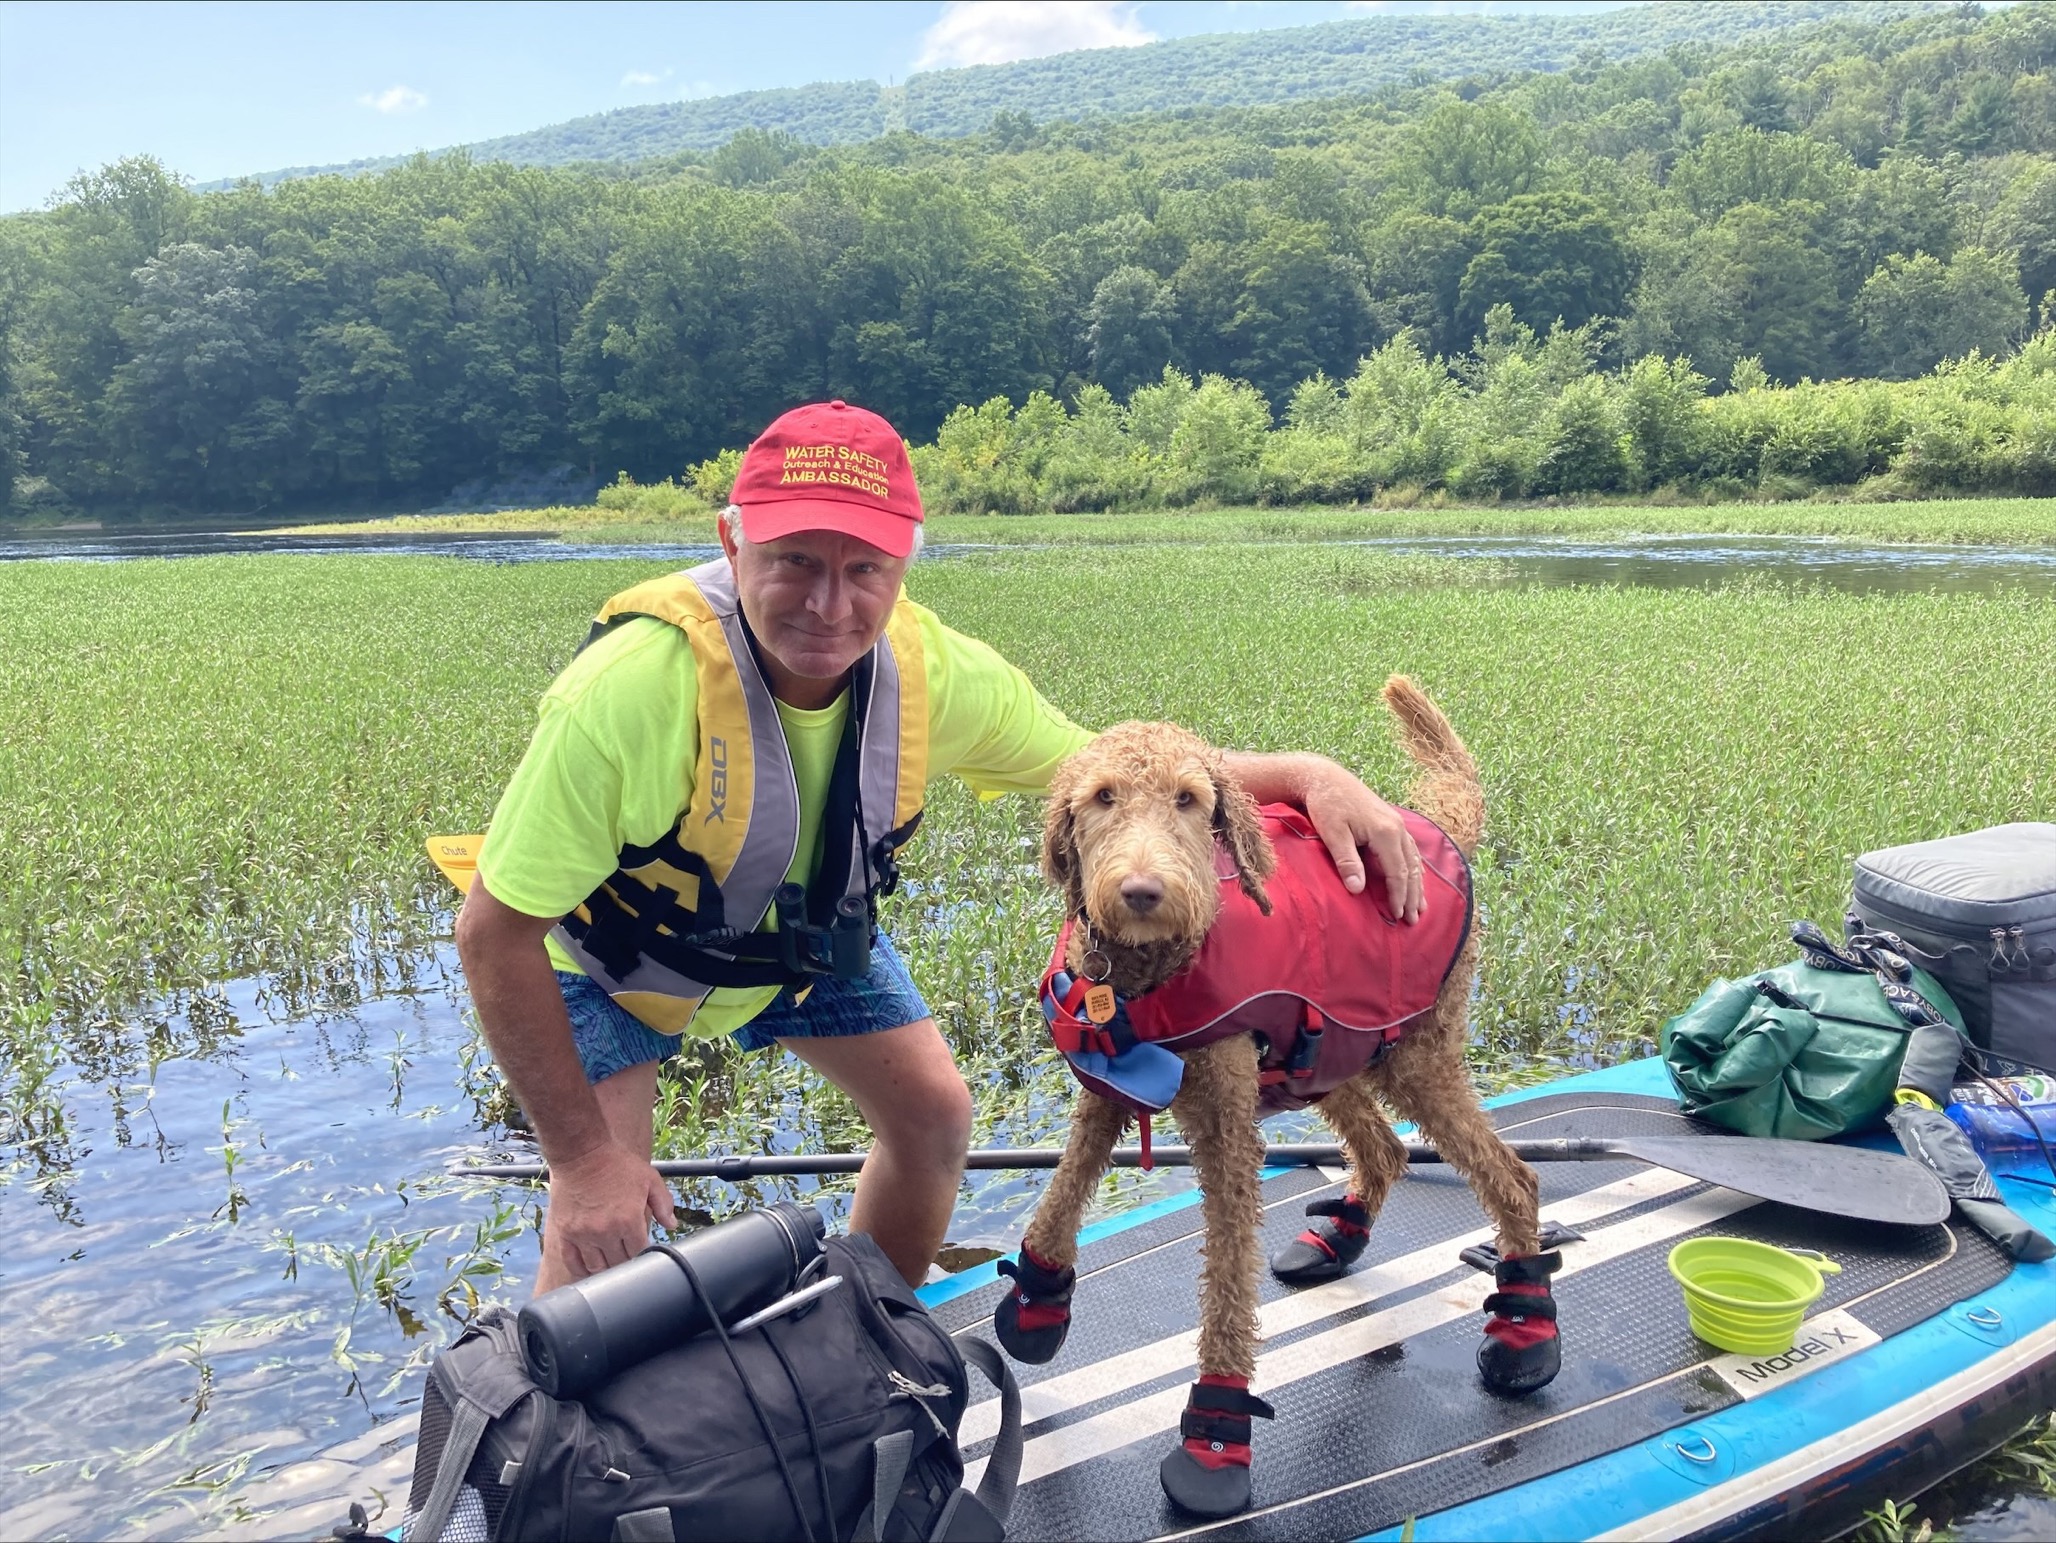 Park volunteer with a dog on a paddleboard in the Delaware river.